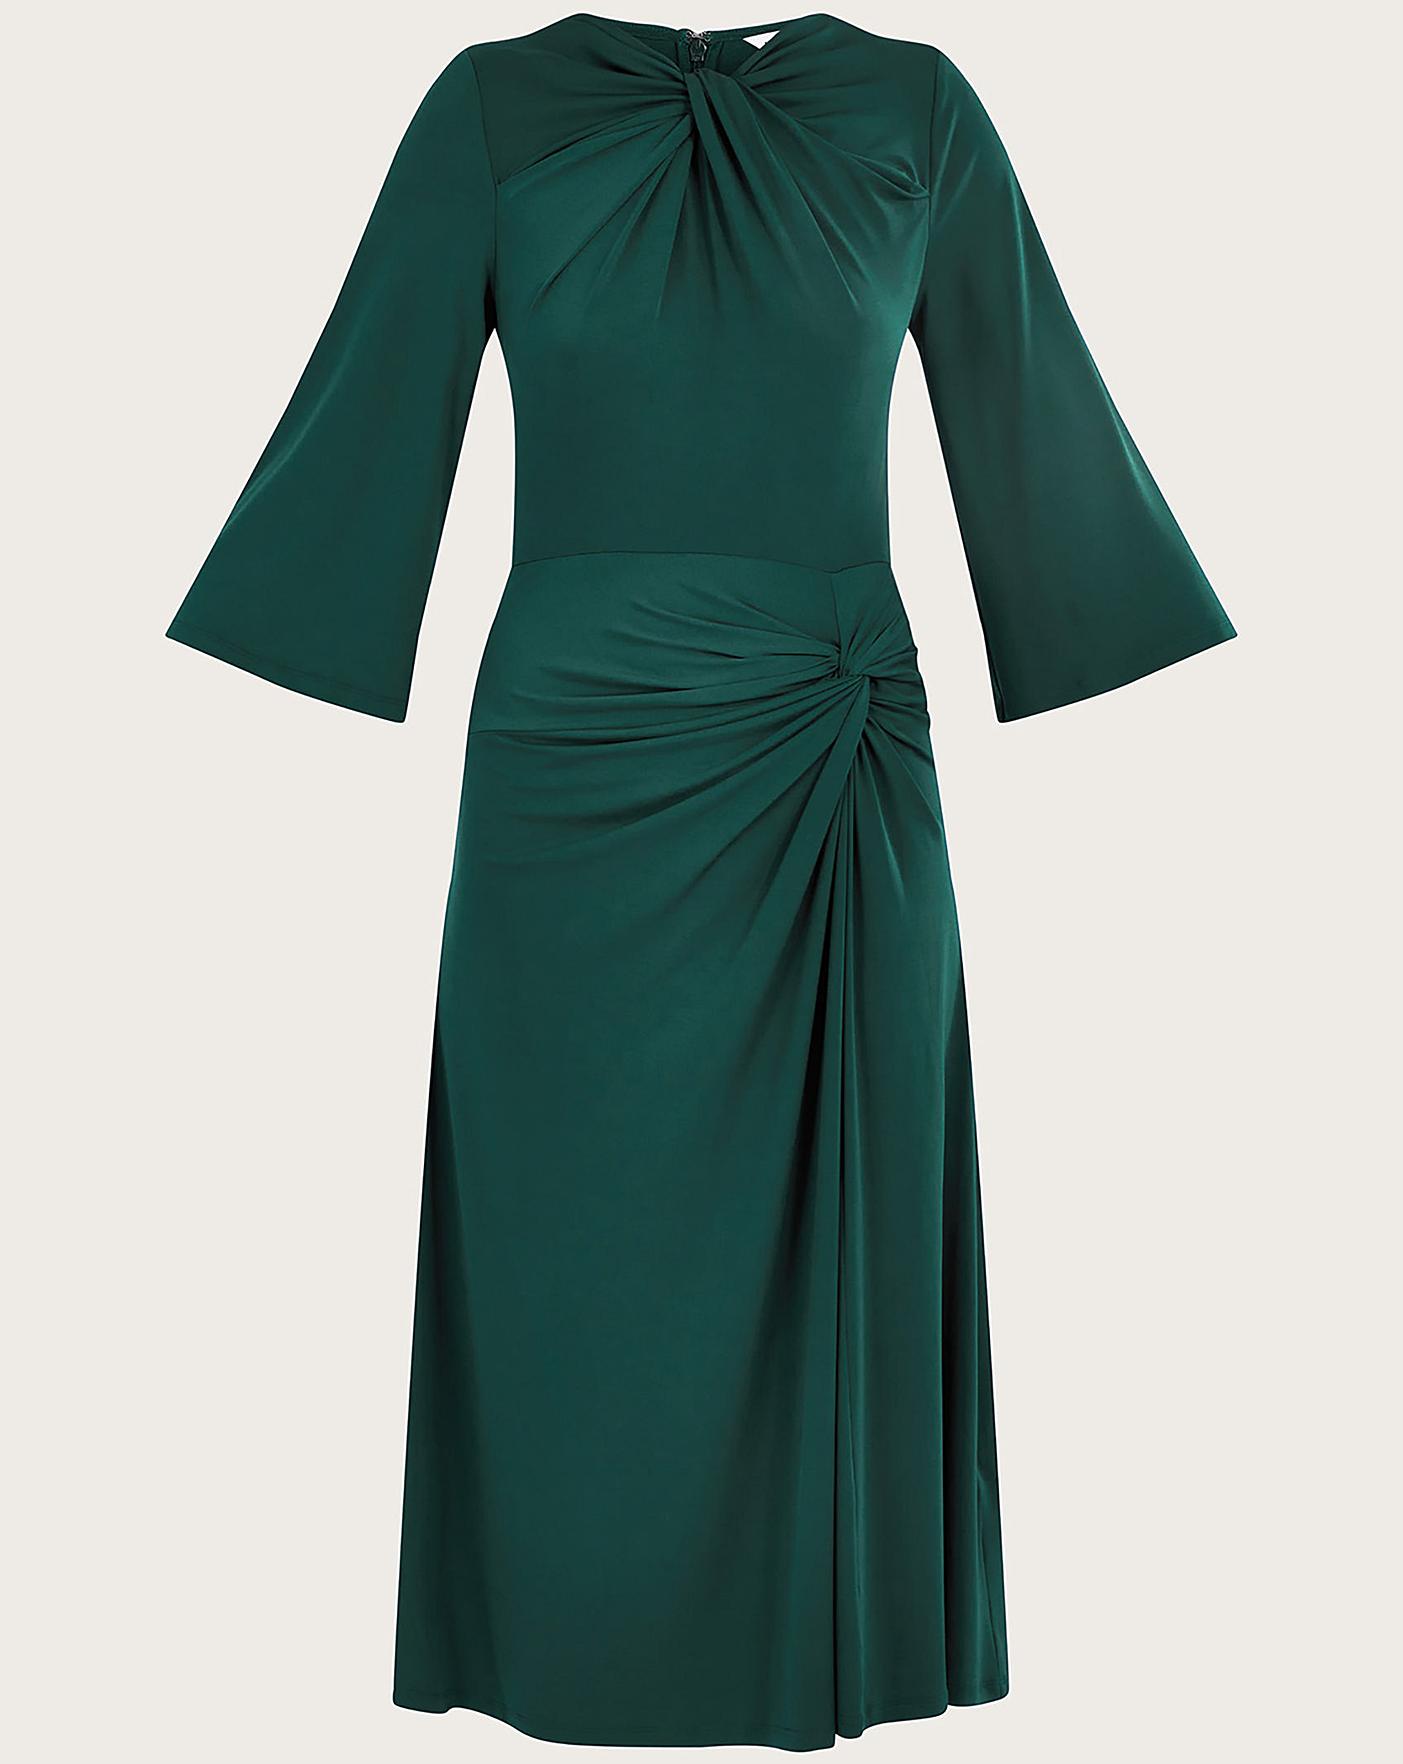 Monsoon Ruched Jersey Dress | J D Williams